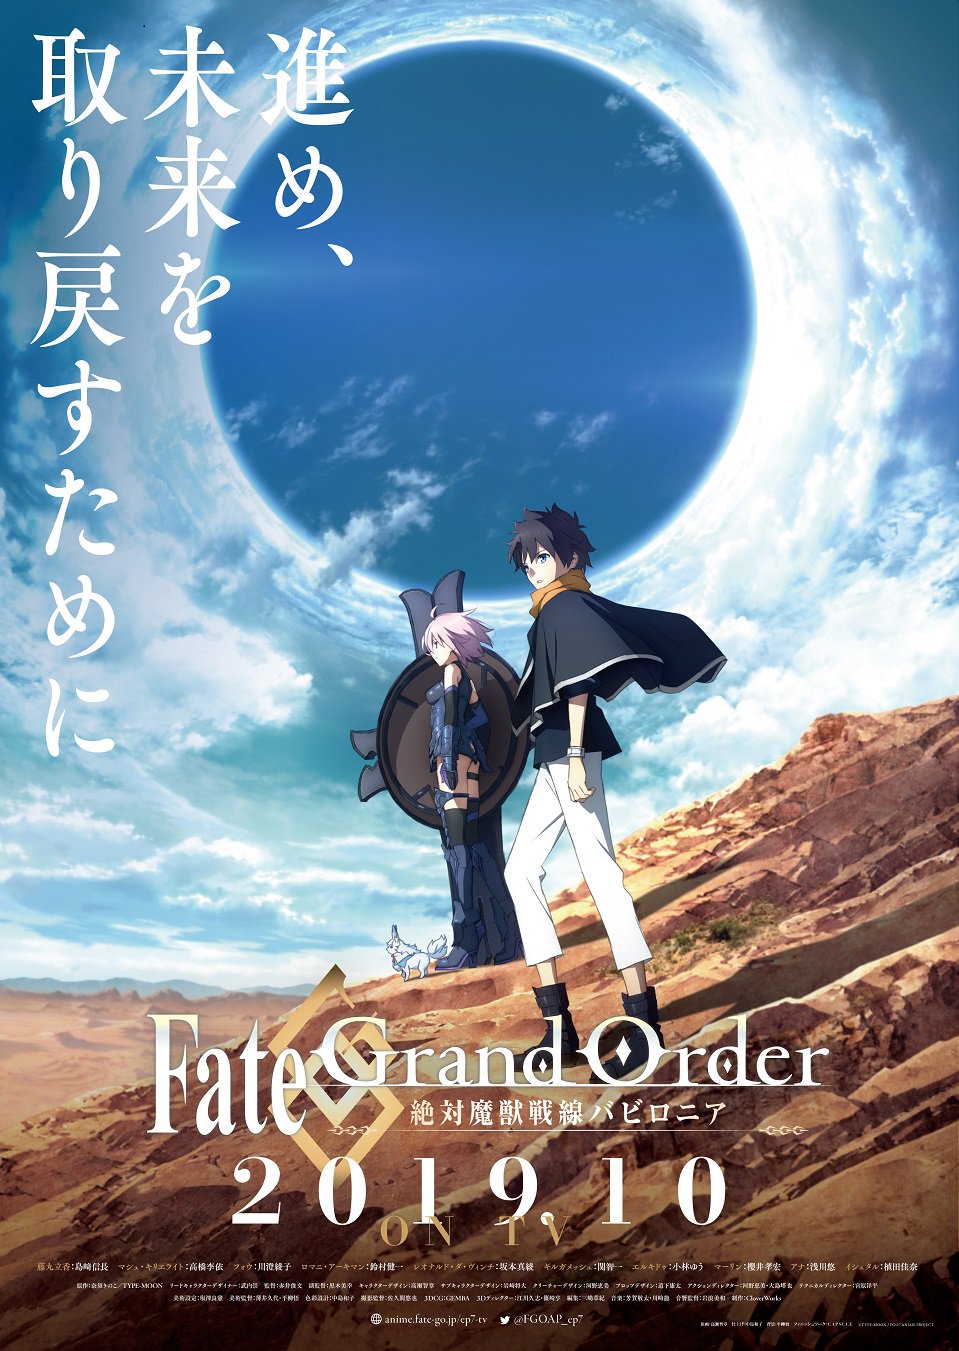 Beginners Guide To FateGrand Order